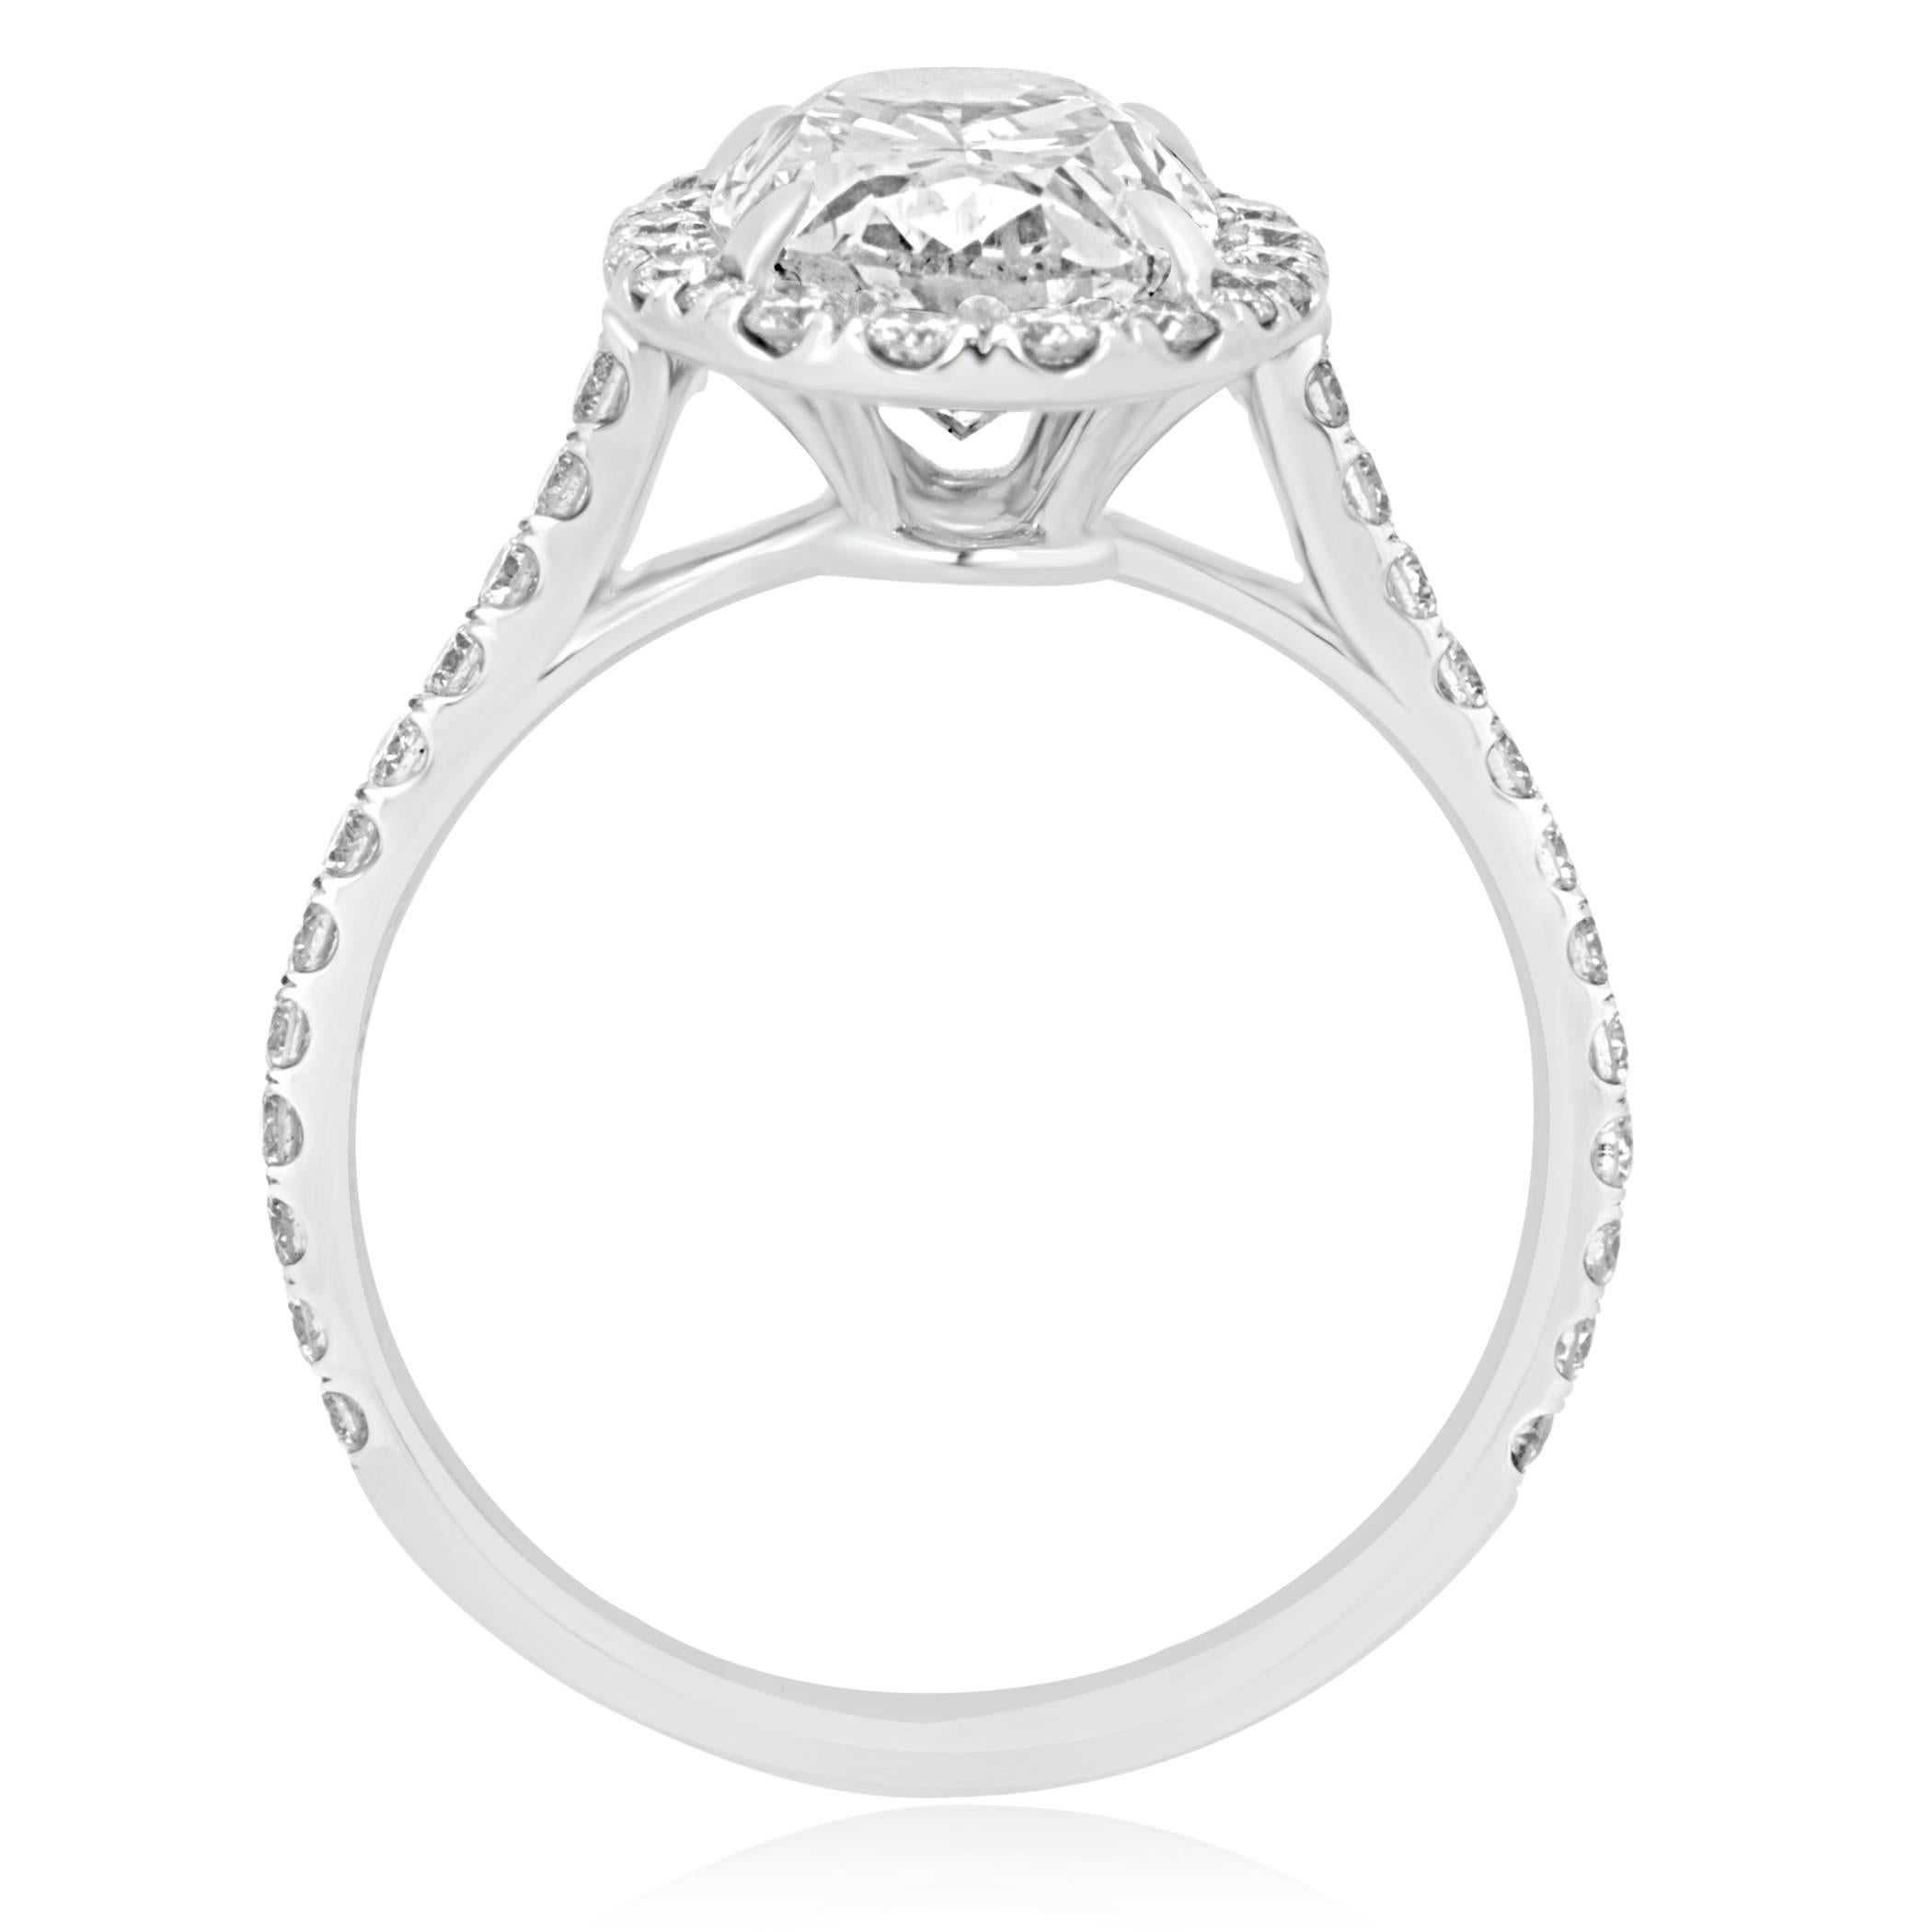 Women's Certified 2.48 Carat Oval Diamond Halo White Gold Bridal Fashion Cocktail Ring